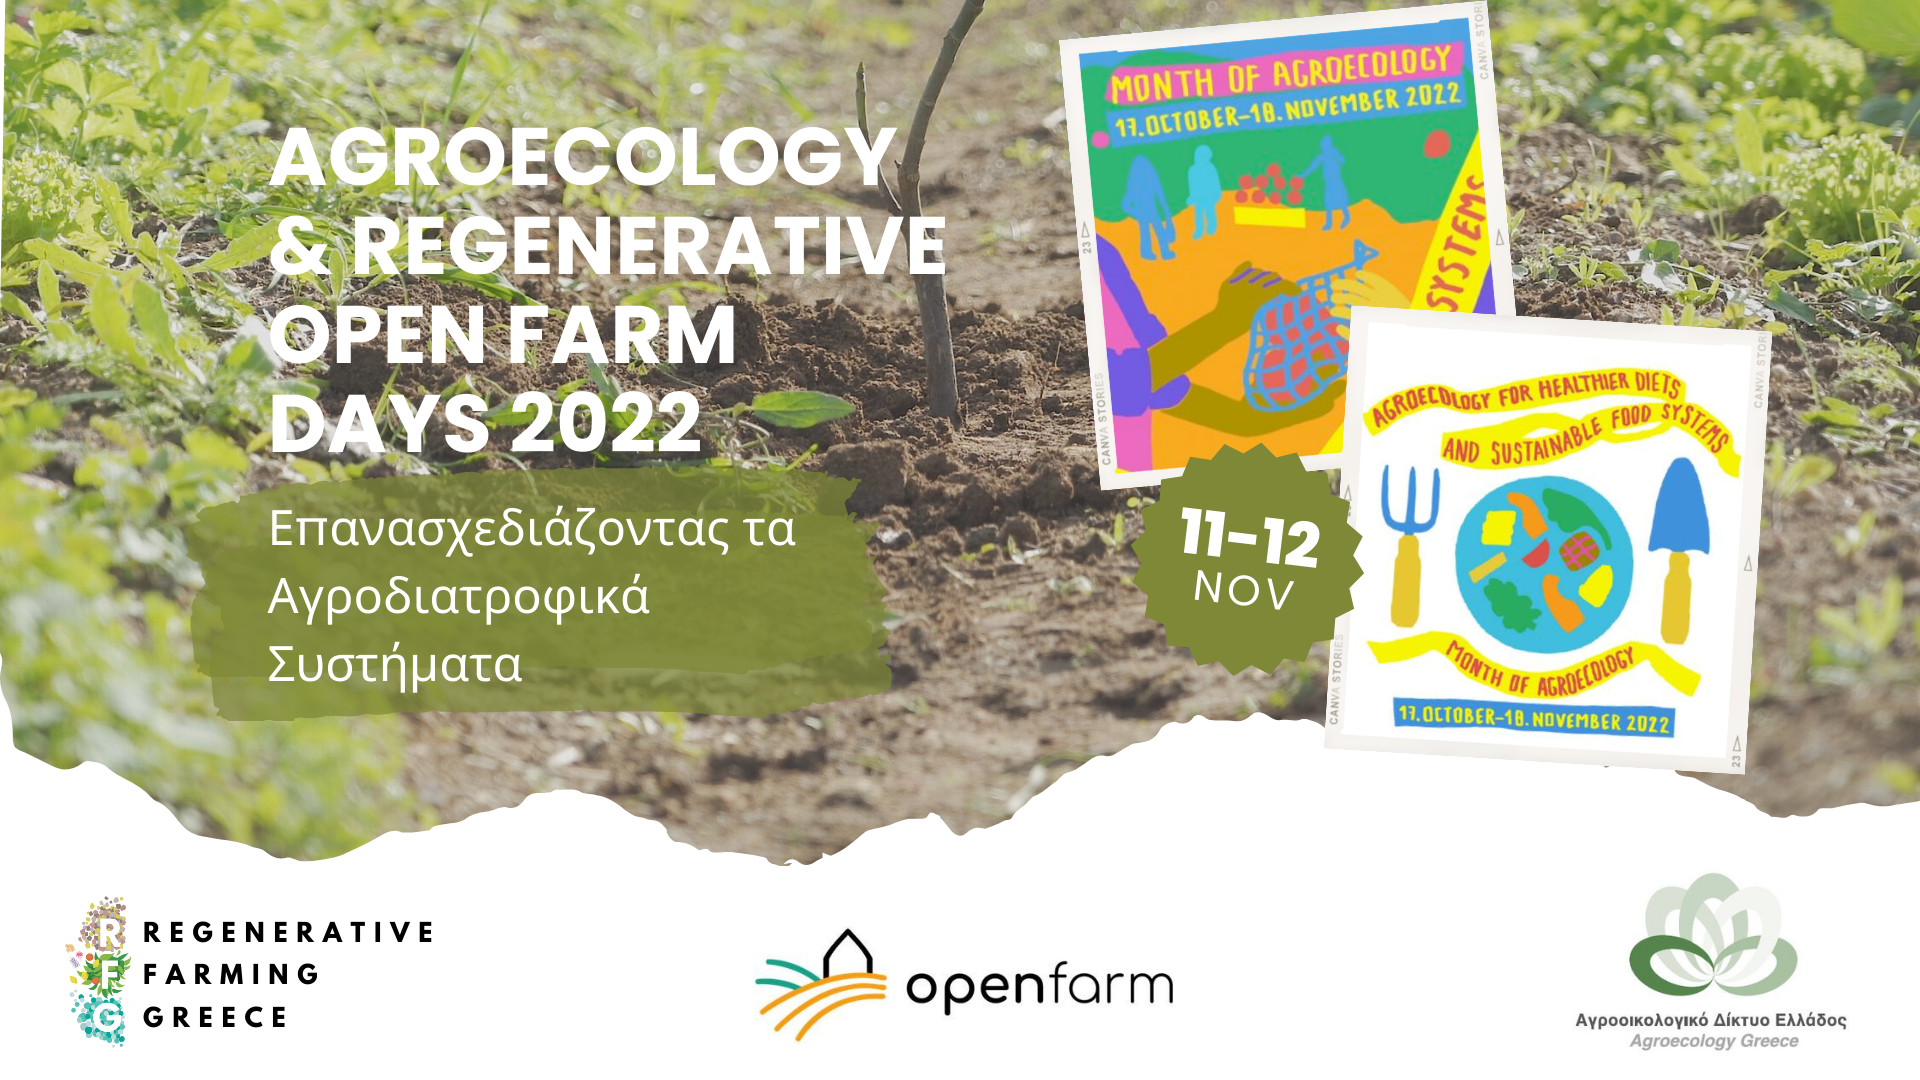 Agroecology & Regenerative Open Farm Days 2022, Redesigning Agro-Food Systems